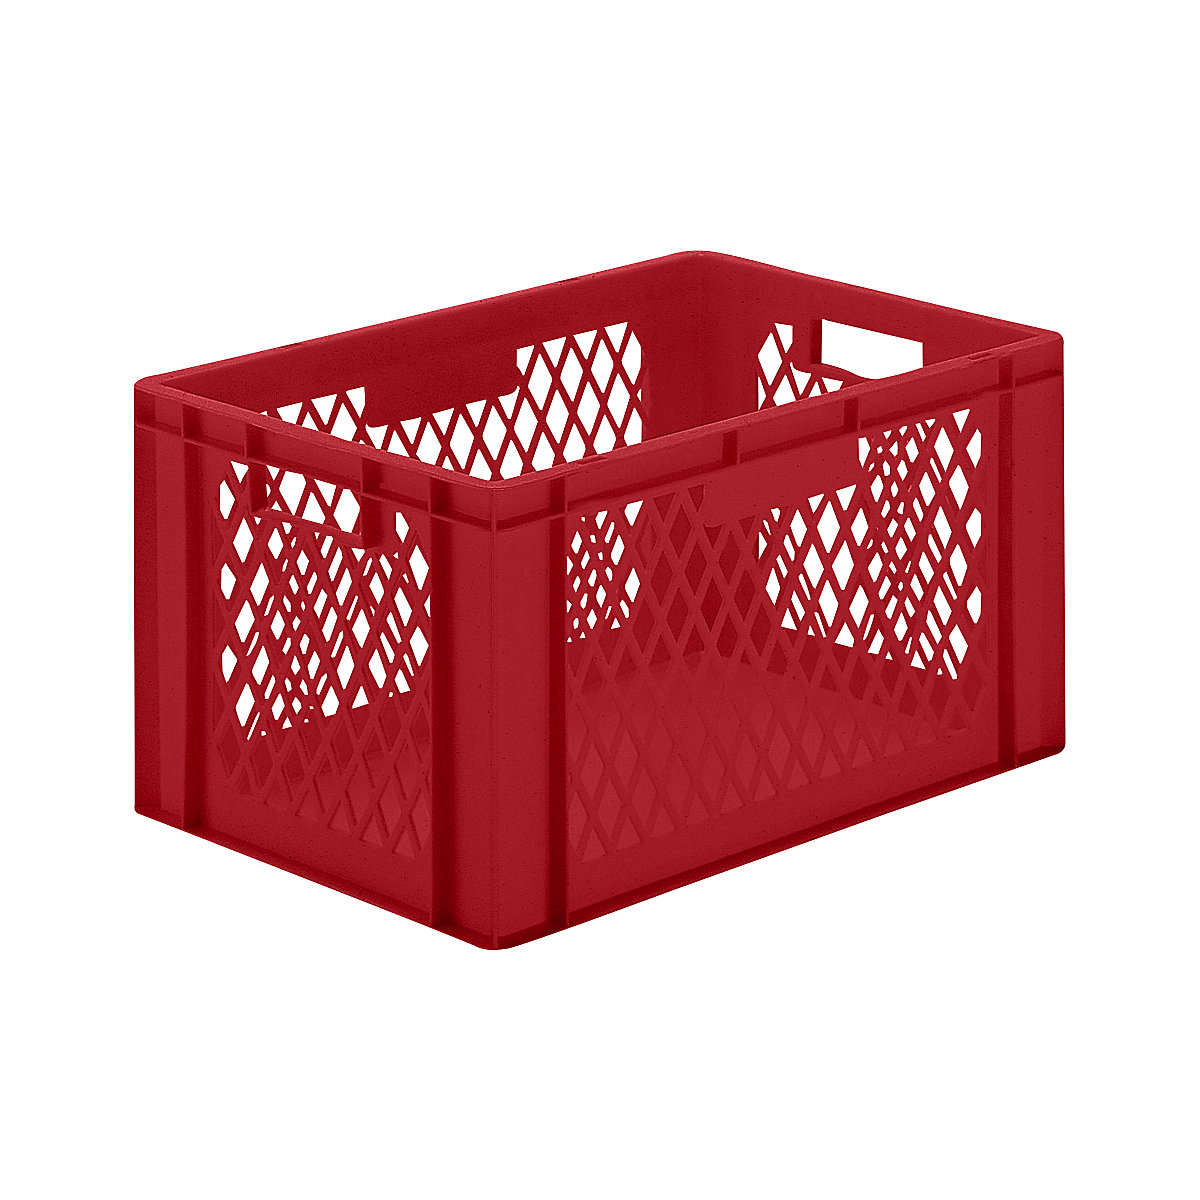 Euro stacking container, perforated walls, closed base, LxWxH 600 x 400 x 320 mm, red, pack of 5-8